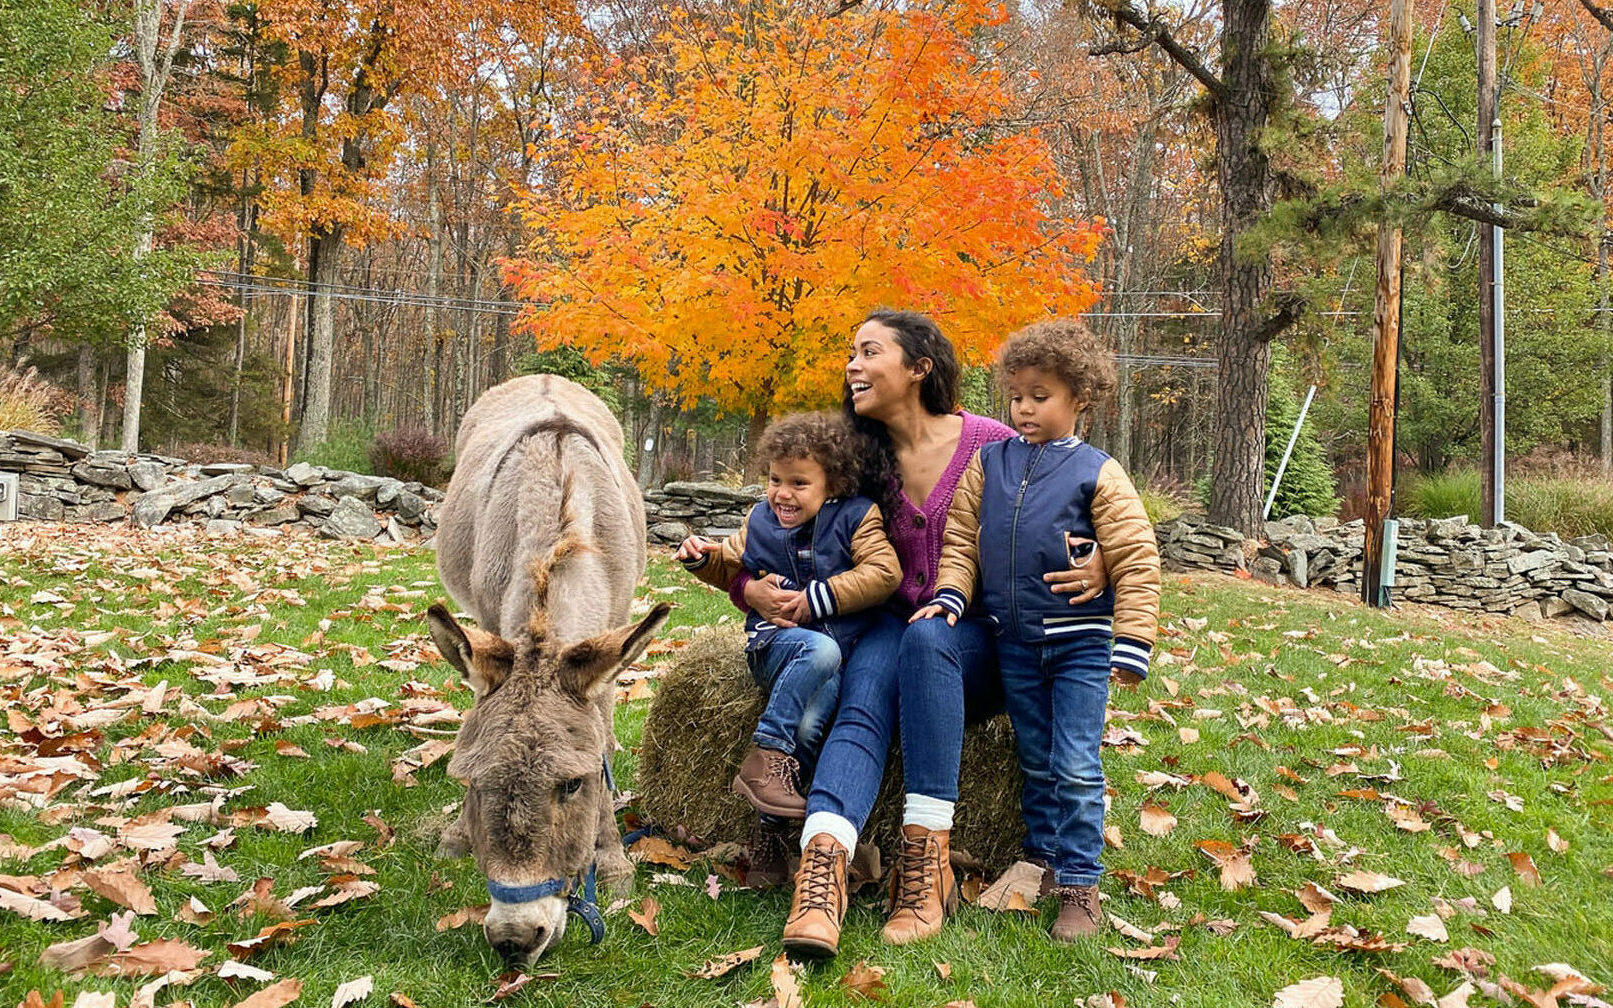 Mother and two young children next to a donkey.